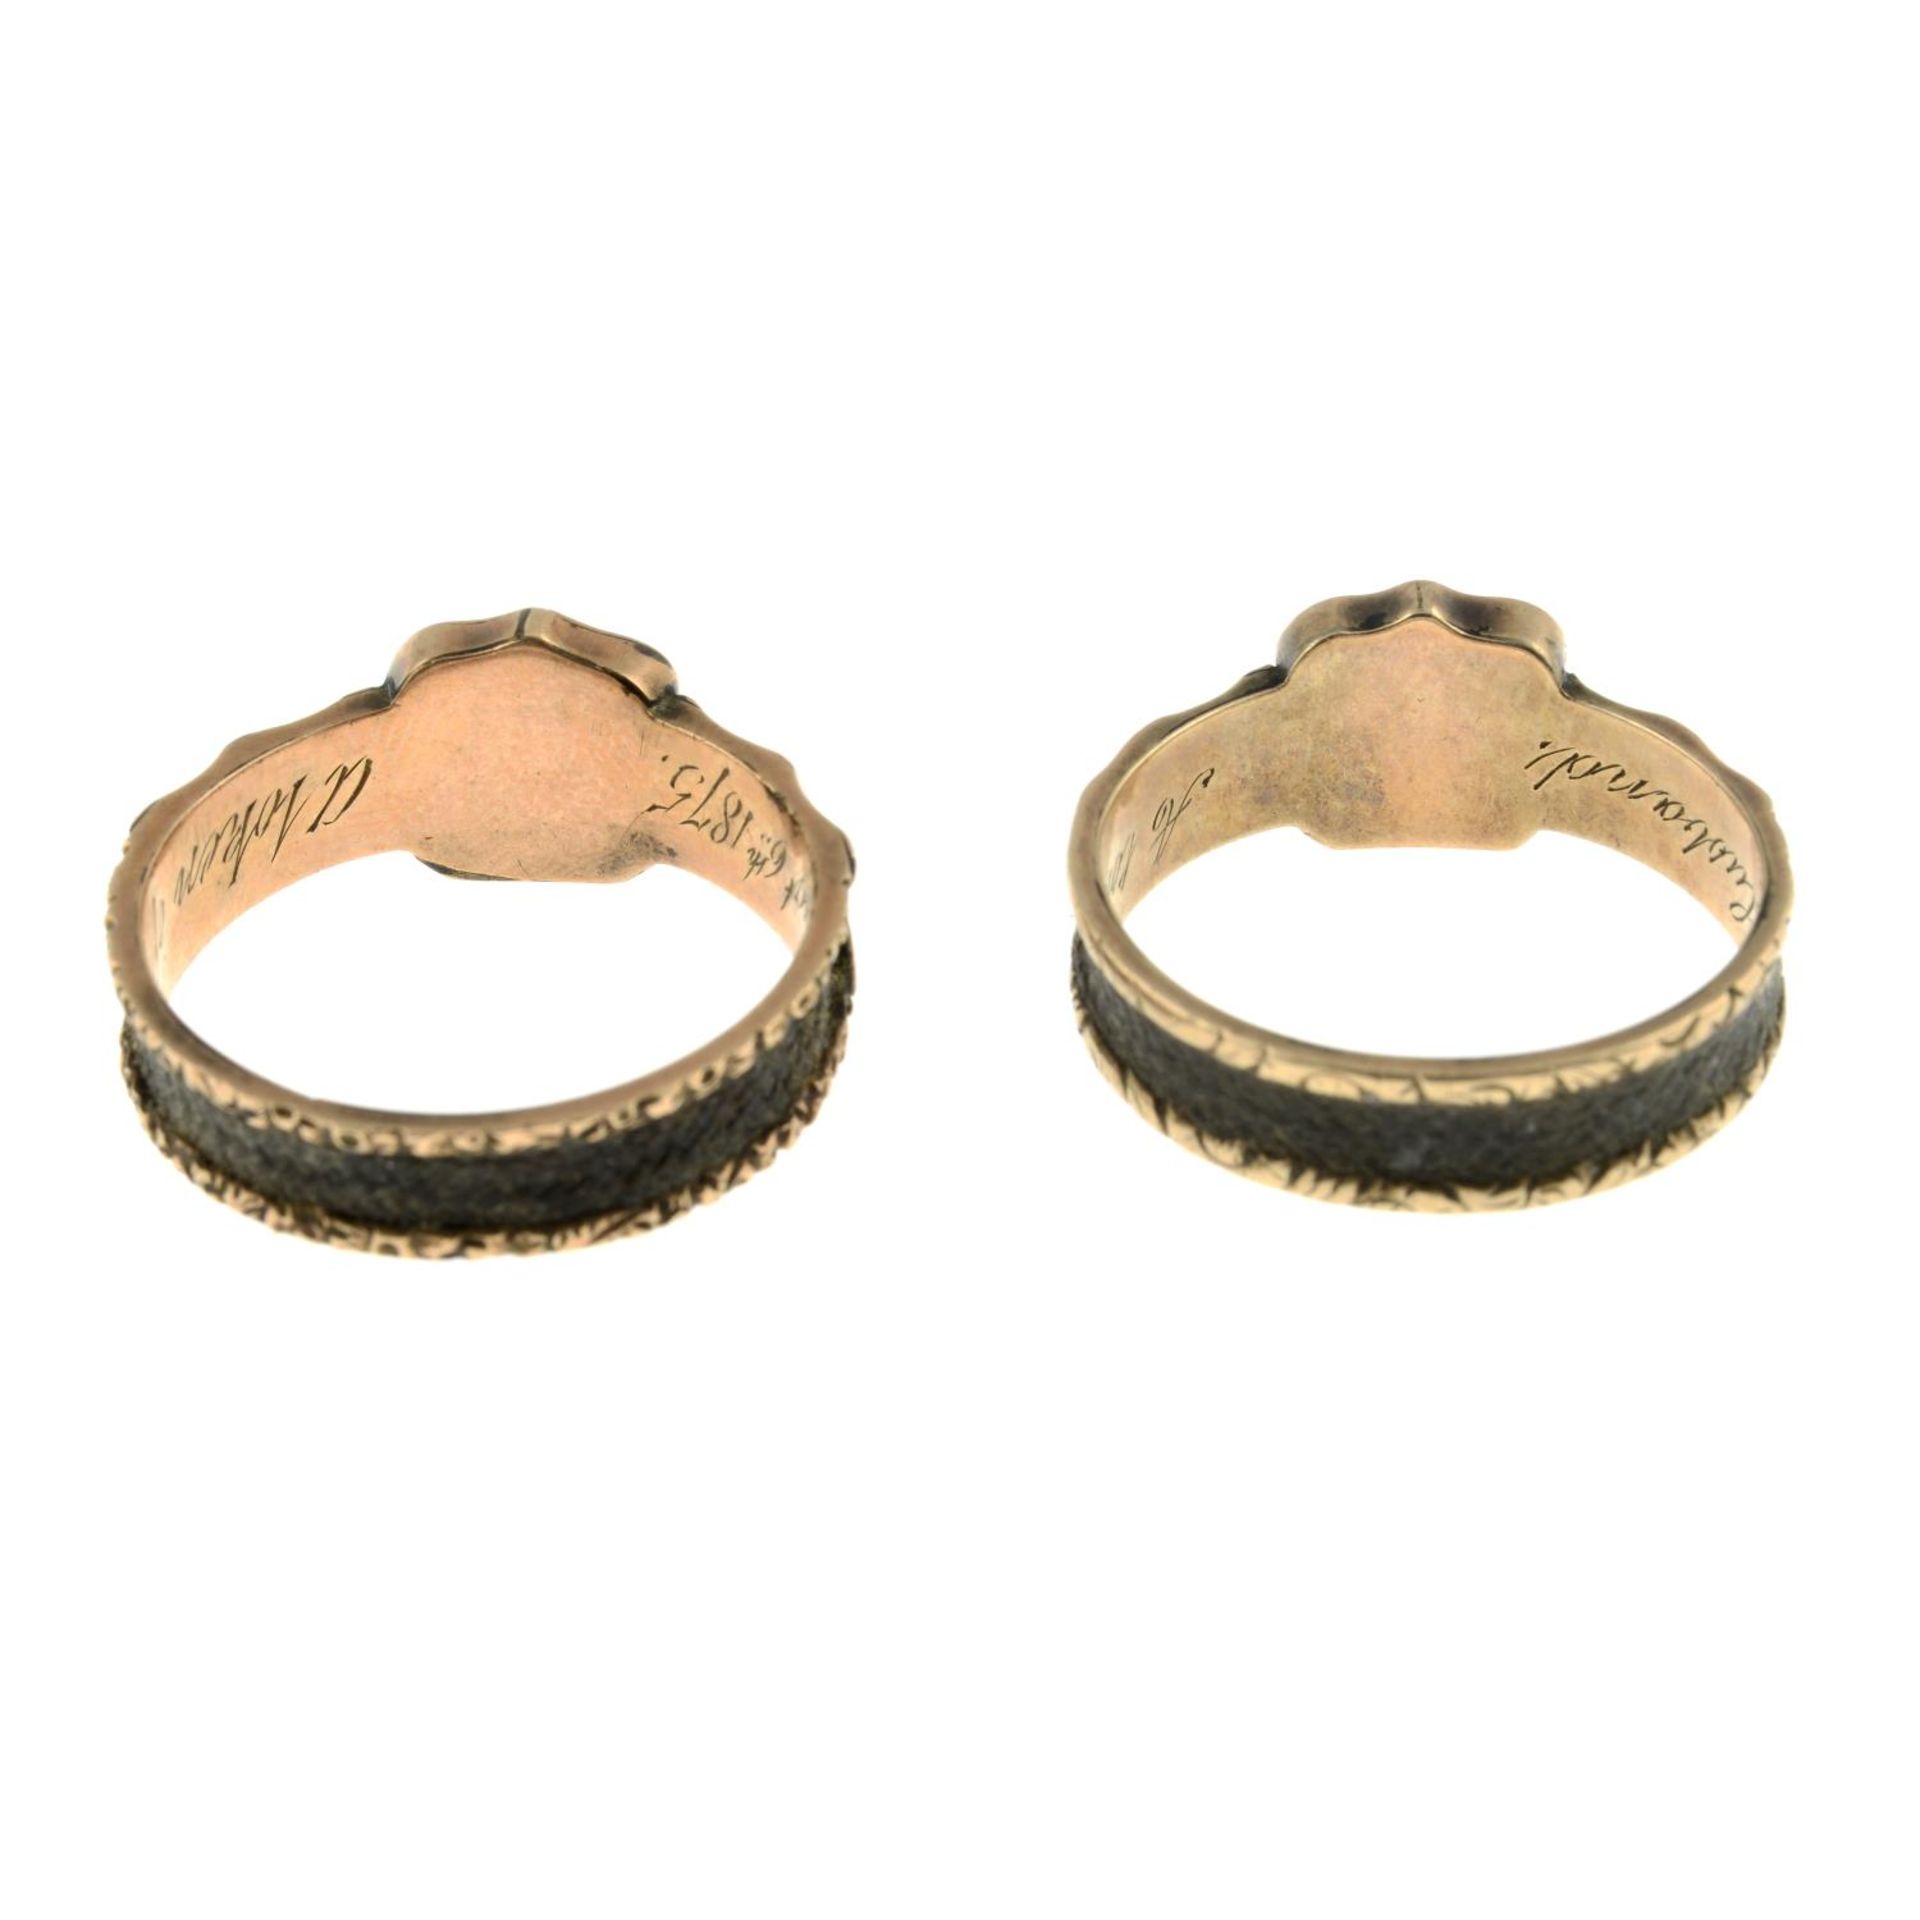 A pair of mid Victorian gold mourning rings, each with hairwork band. - Image 3 of 3